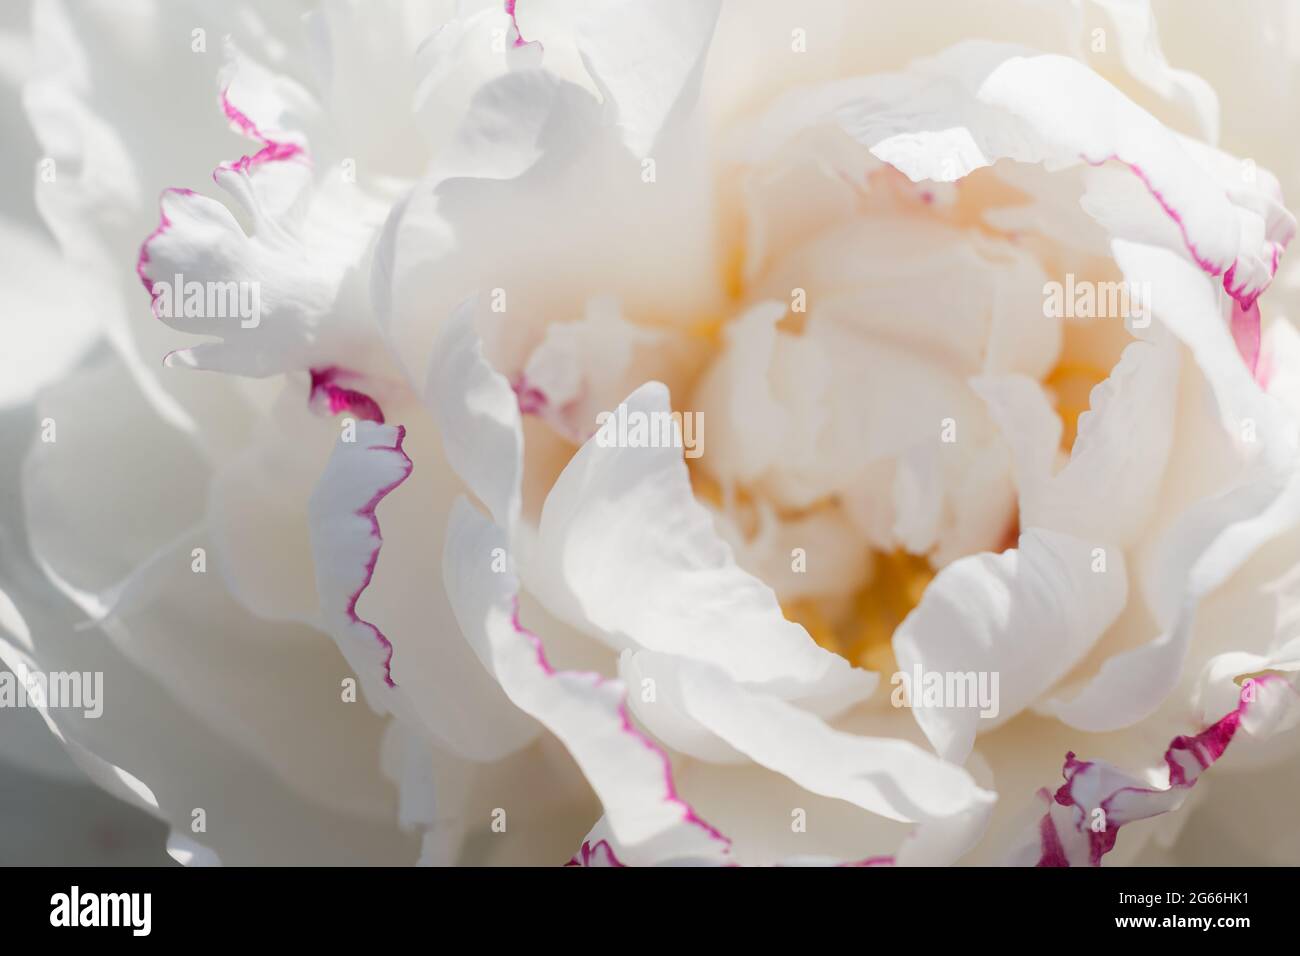 White peony flower close up. Beautiful natural floral background. Peony varieties Festiva maxima white petals with pink border Stock Photo